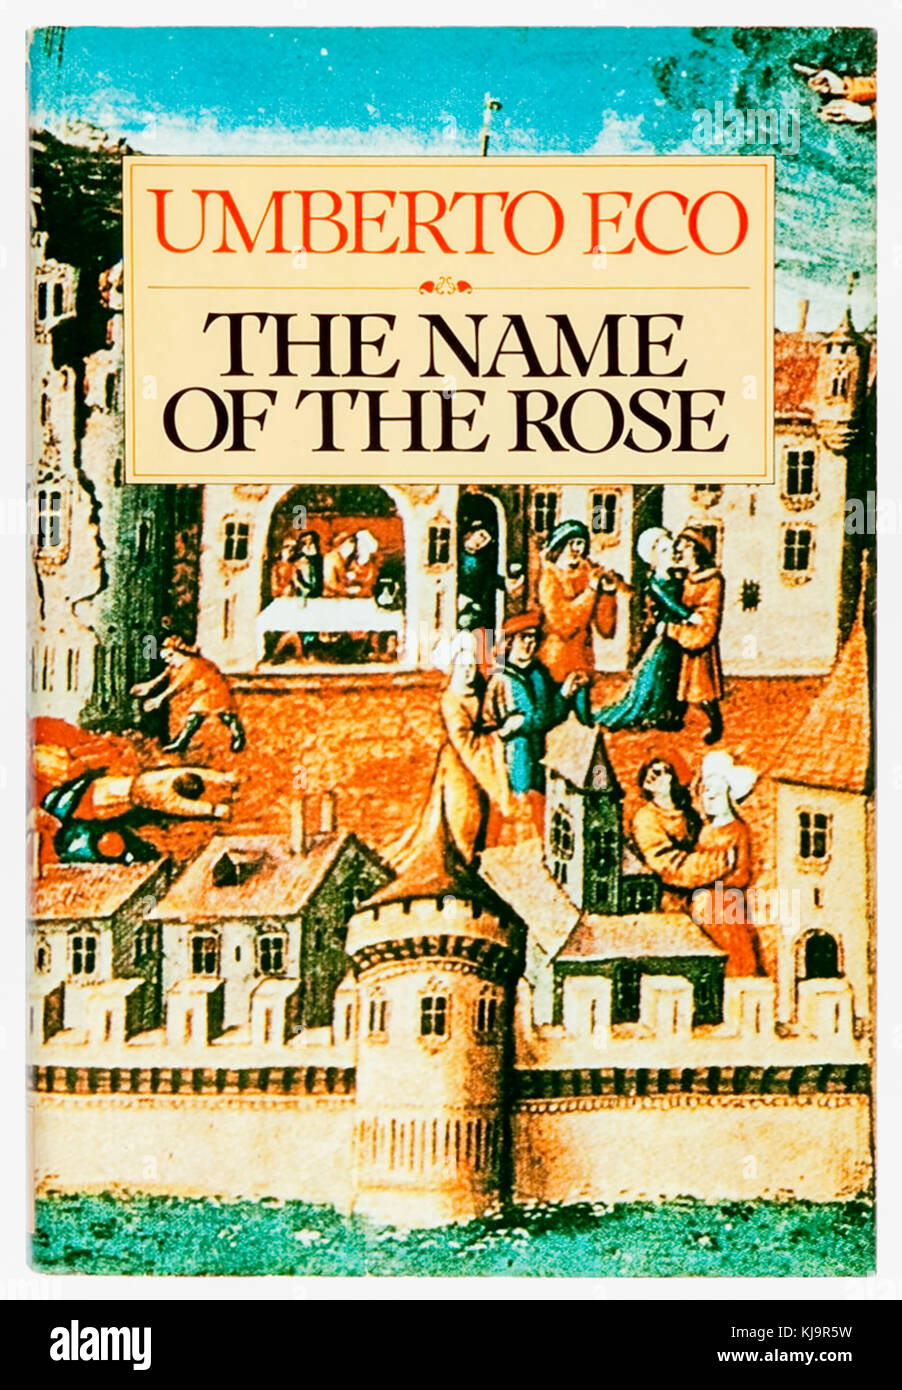 ‘The Name of the Rose’ 1983 first English edition of ‘Il nome della rosa’ by Umberto Eco (1932-2016) translated by William Weaver (1923-2013). Stock Photo